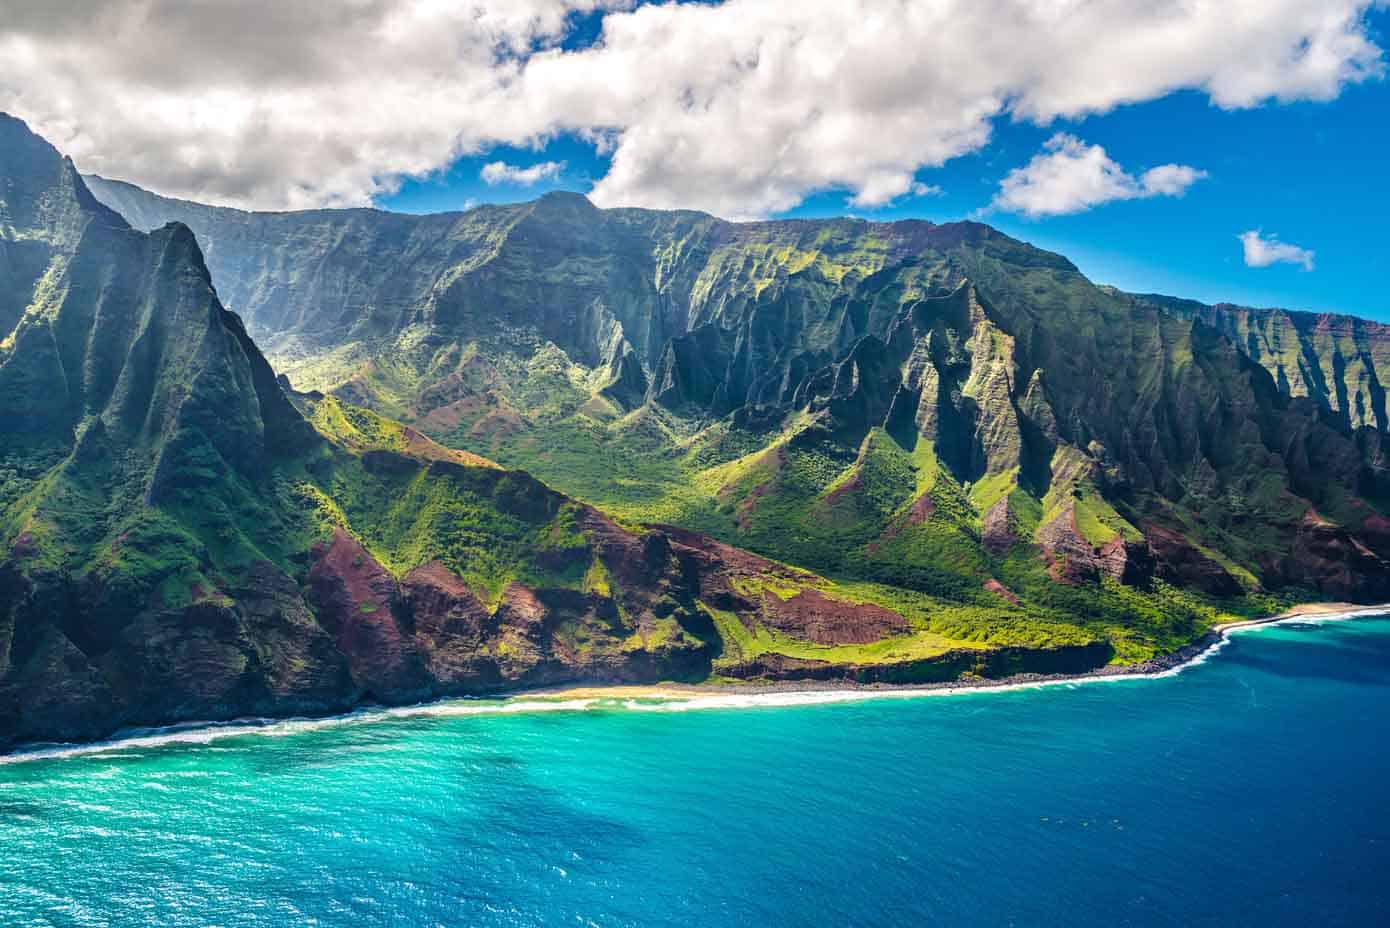 Majestic sea cliffs on the Napali Coast of Hawaii sloping into a bright blue ocean.